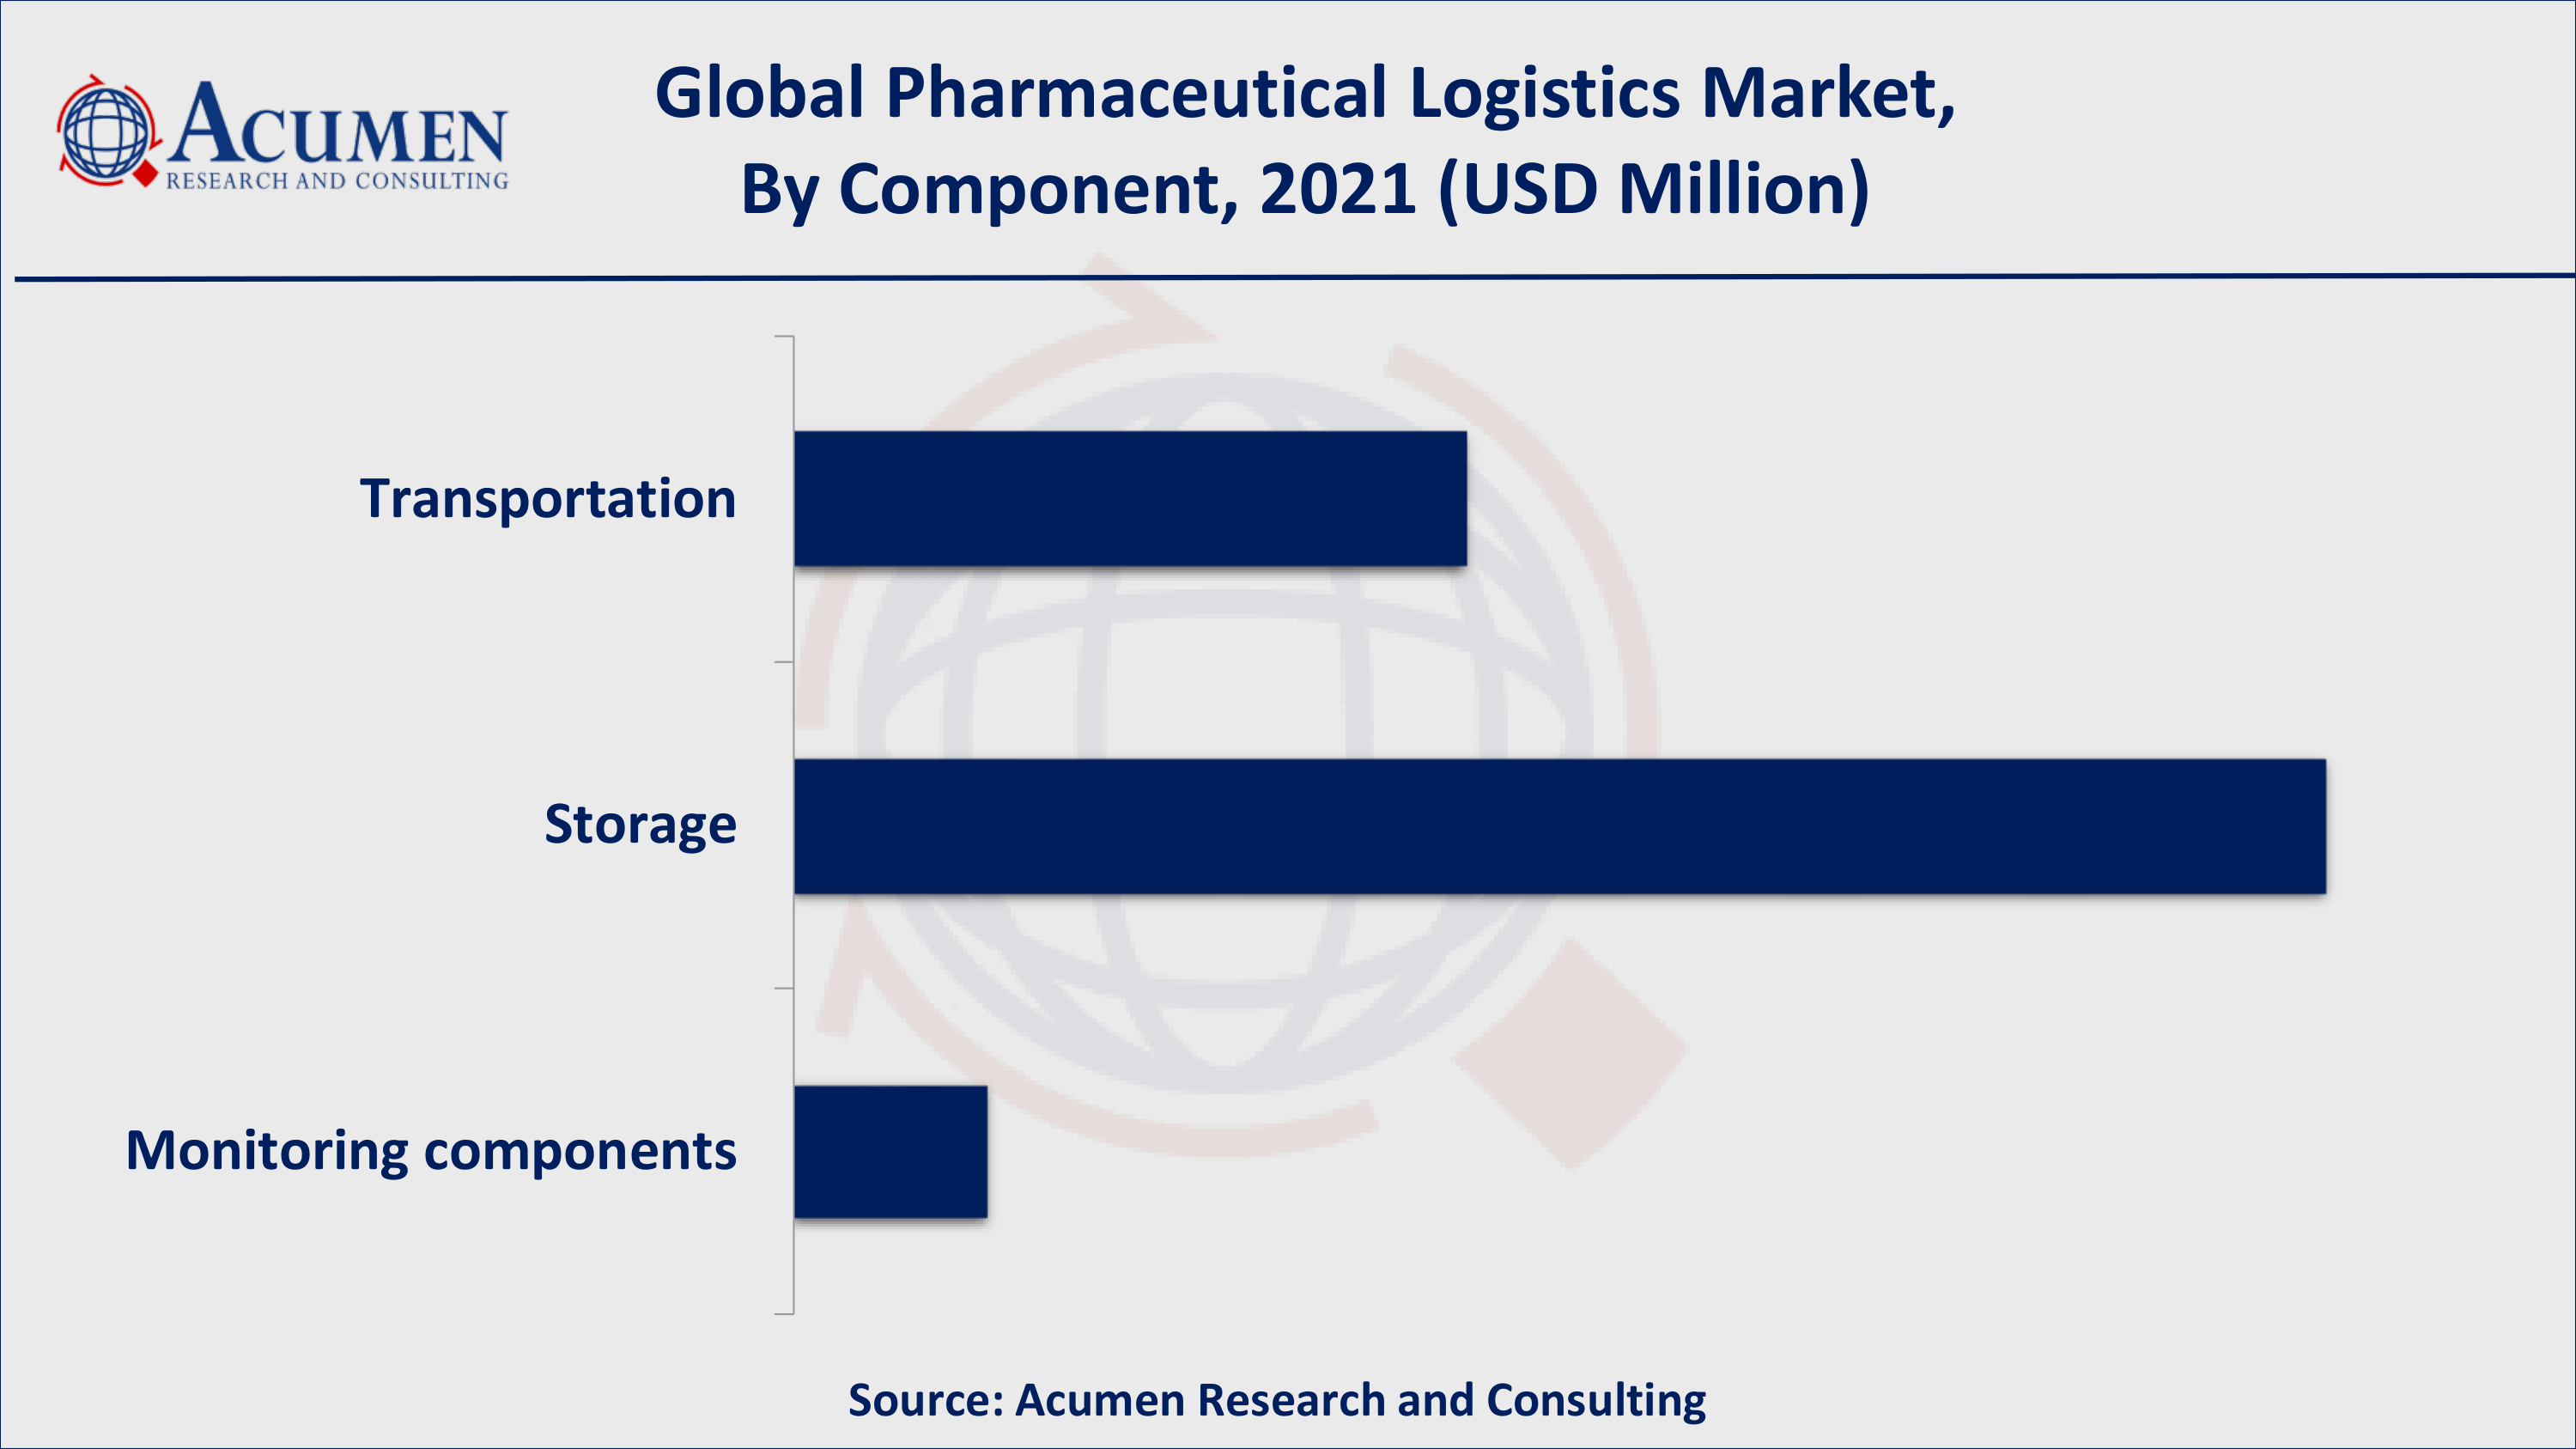 Based on component, storage pharmaceutical logistics gathered over 64% of the overall market share in 2021